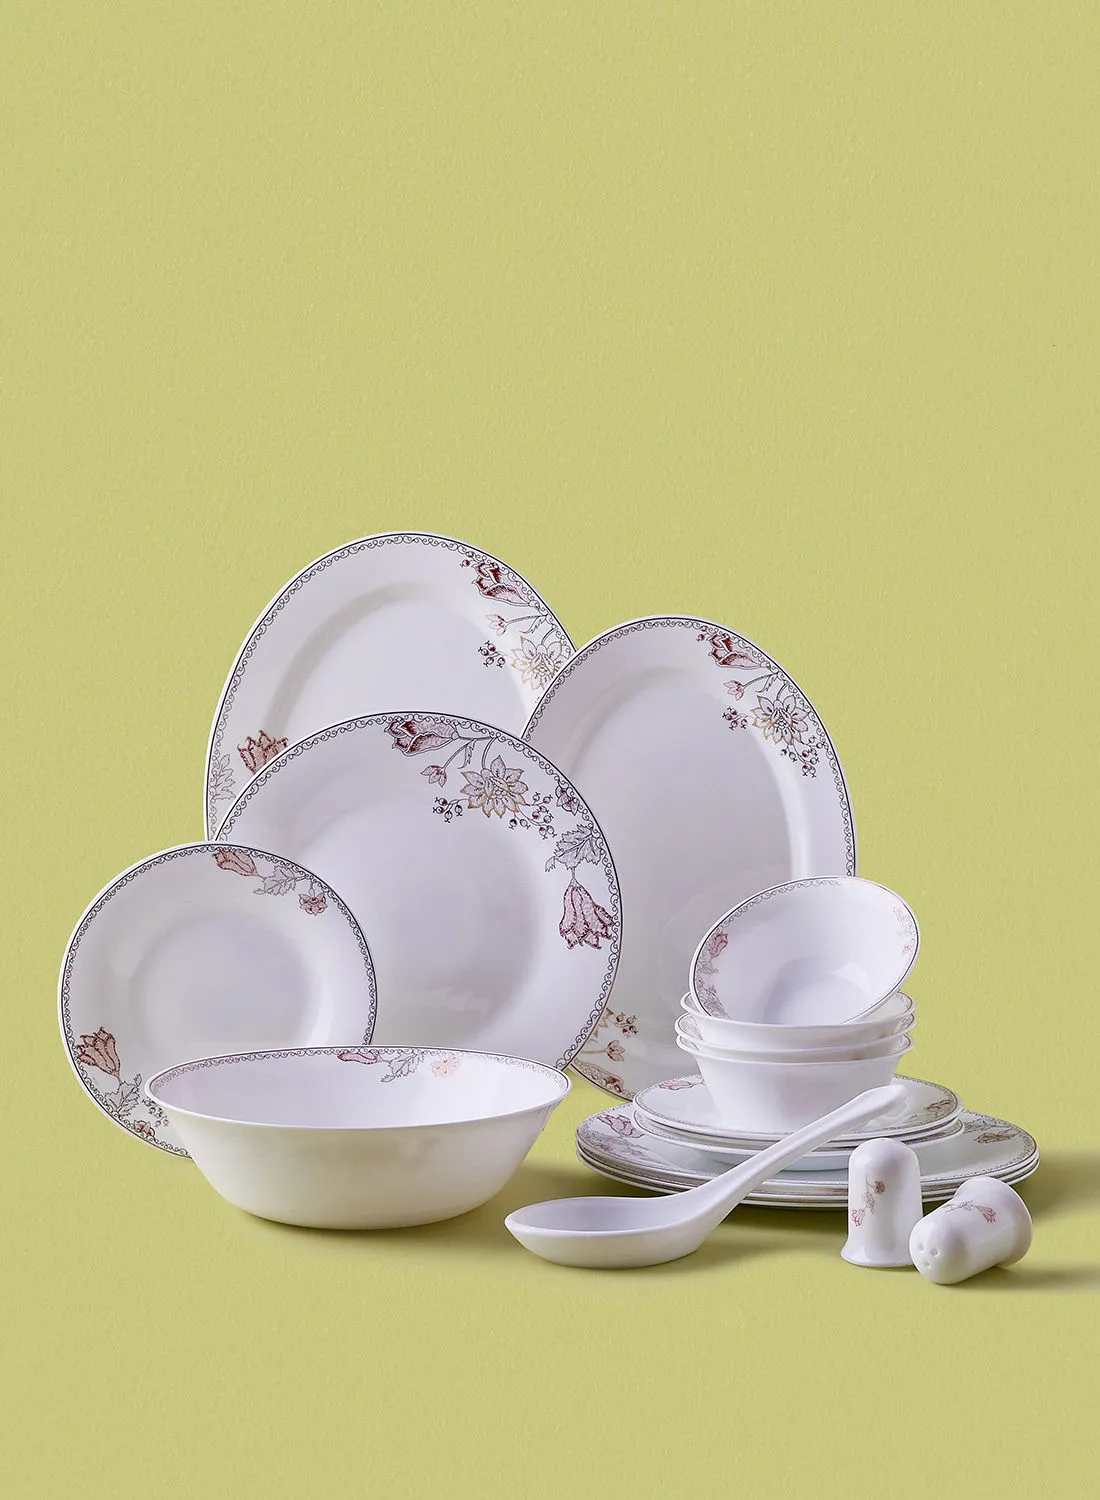 noon east 18 Piece Opalware Dinner Set - Light Weight Dishes, Plates - Dinner Plate, Side Plate, Bowl, Serving Dish And Bowl - Serves 4 - Festive Design Tulip Gold